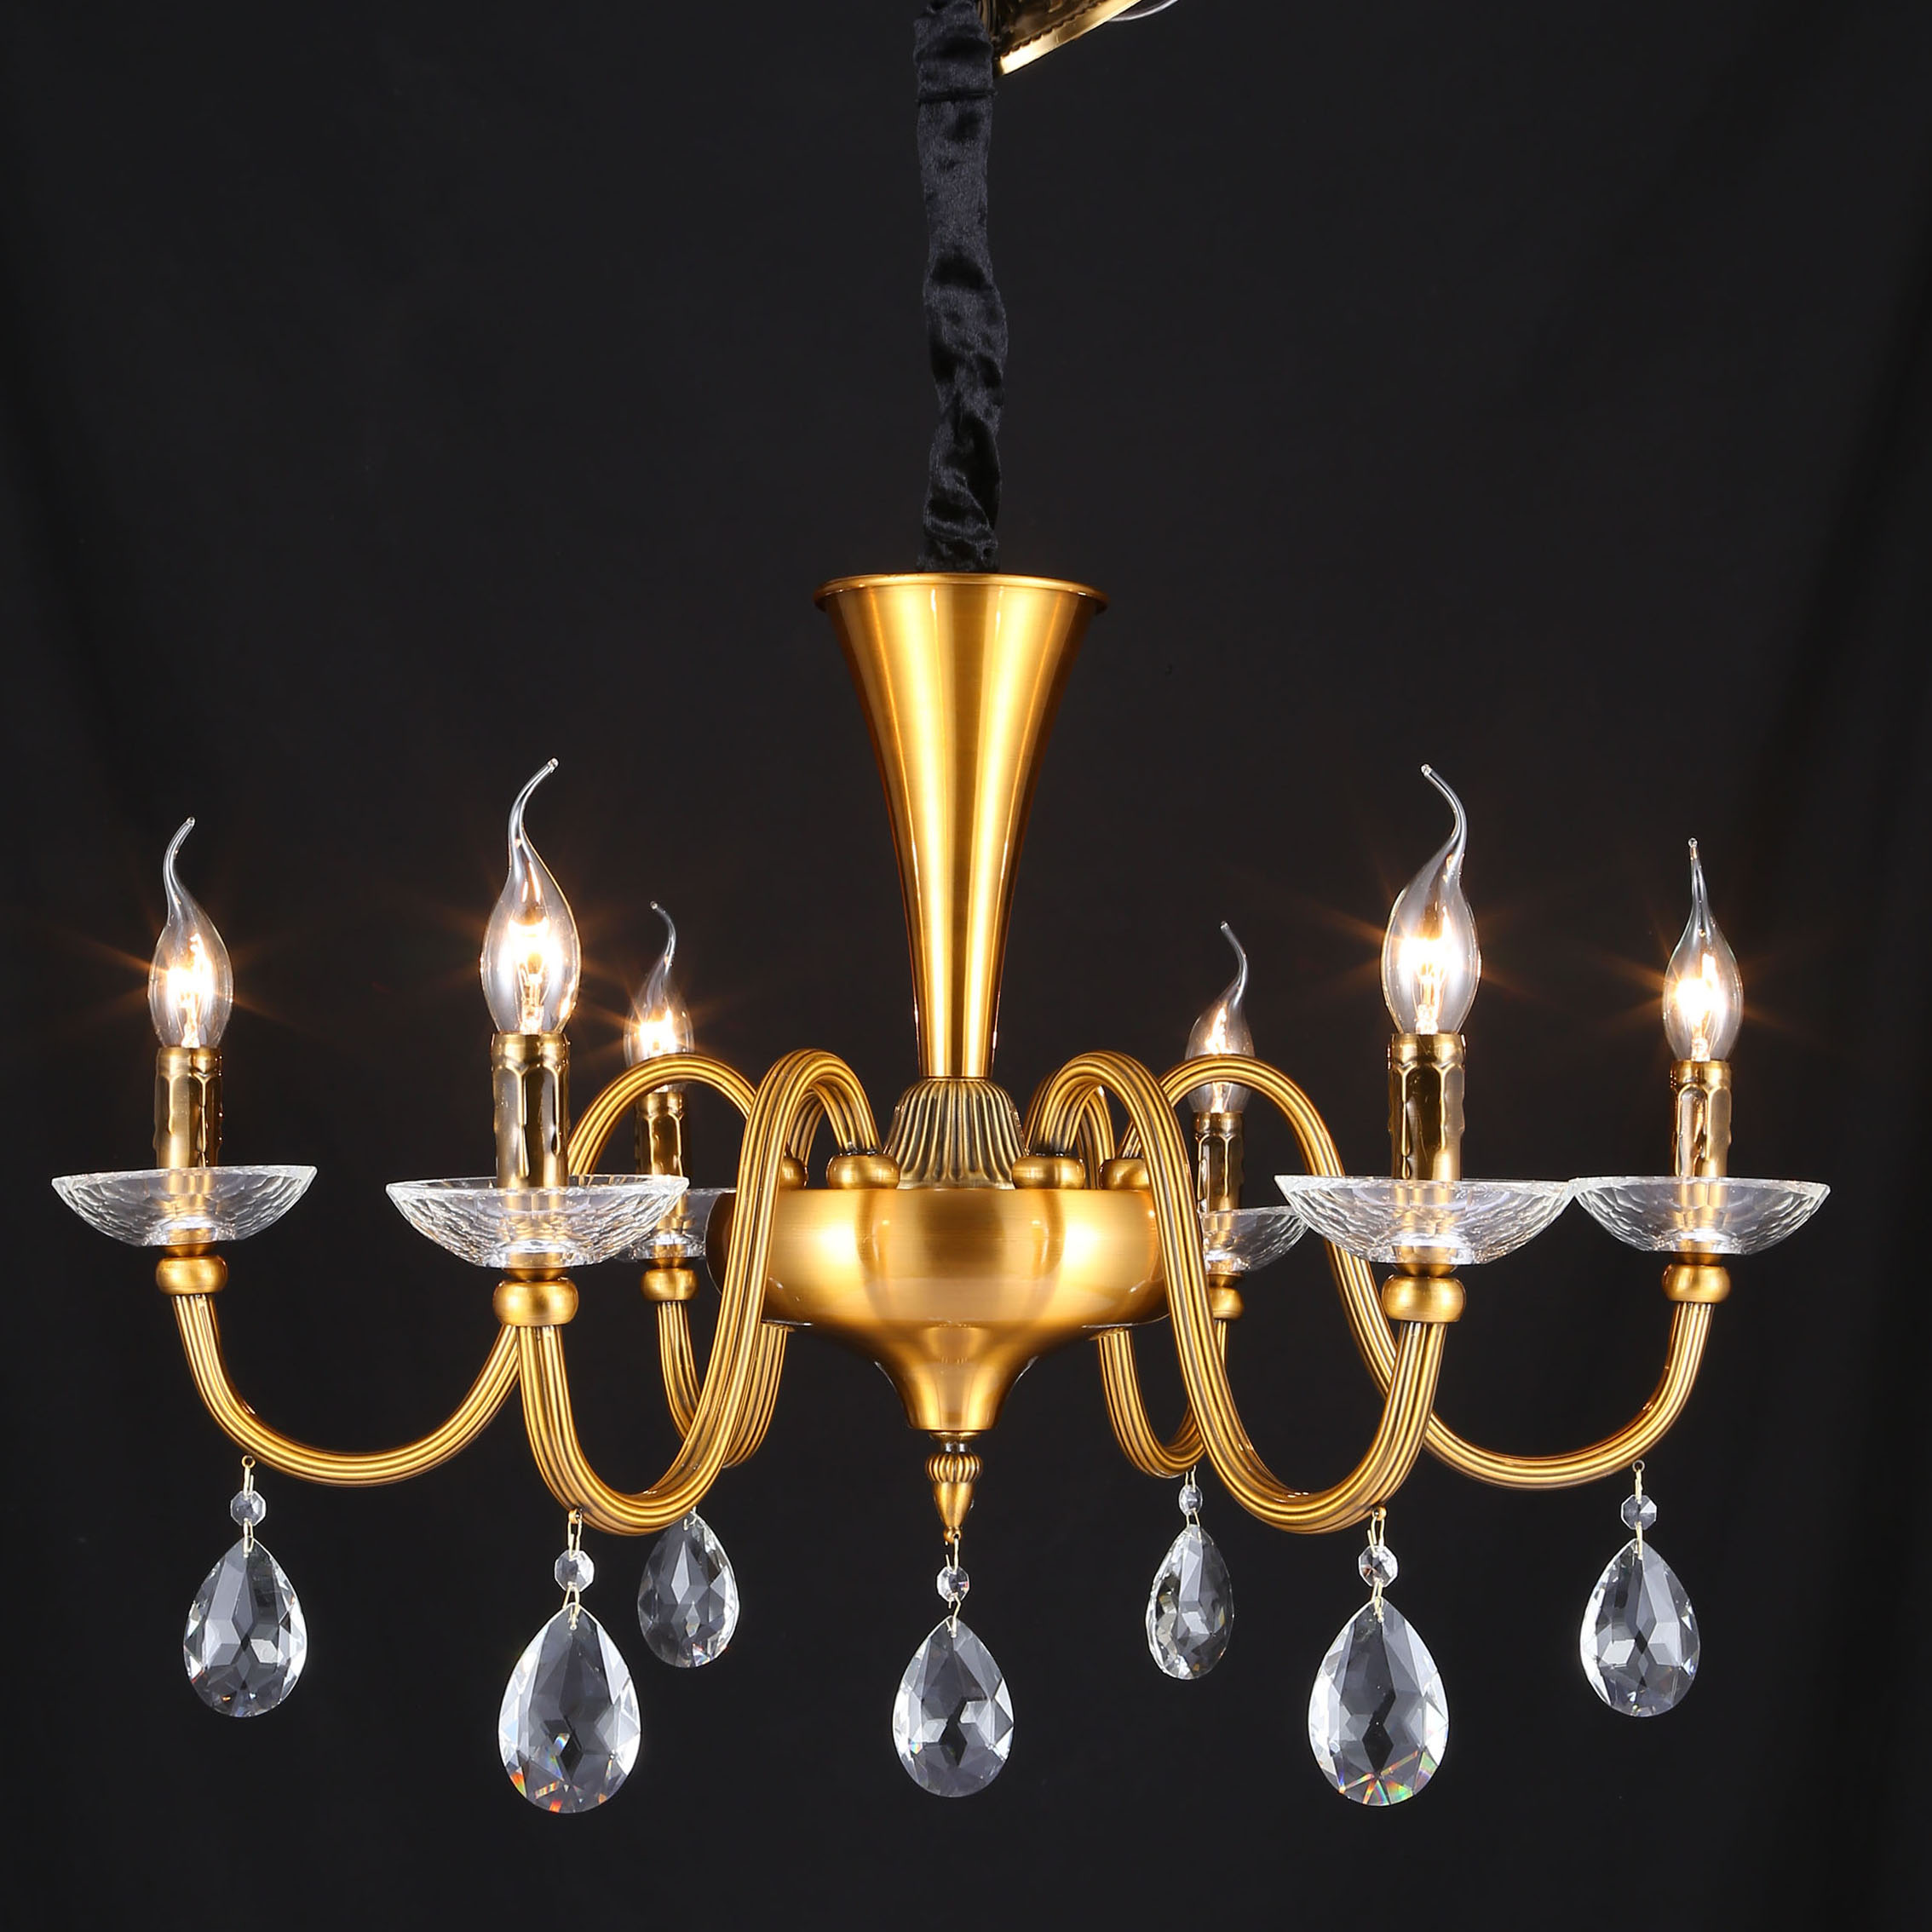 SHIXIN gold antique brass pendant lamp candle decorative chandelier with crystal